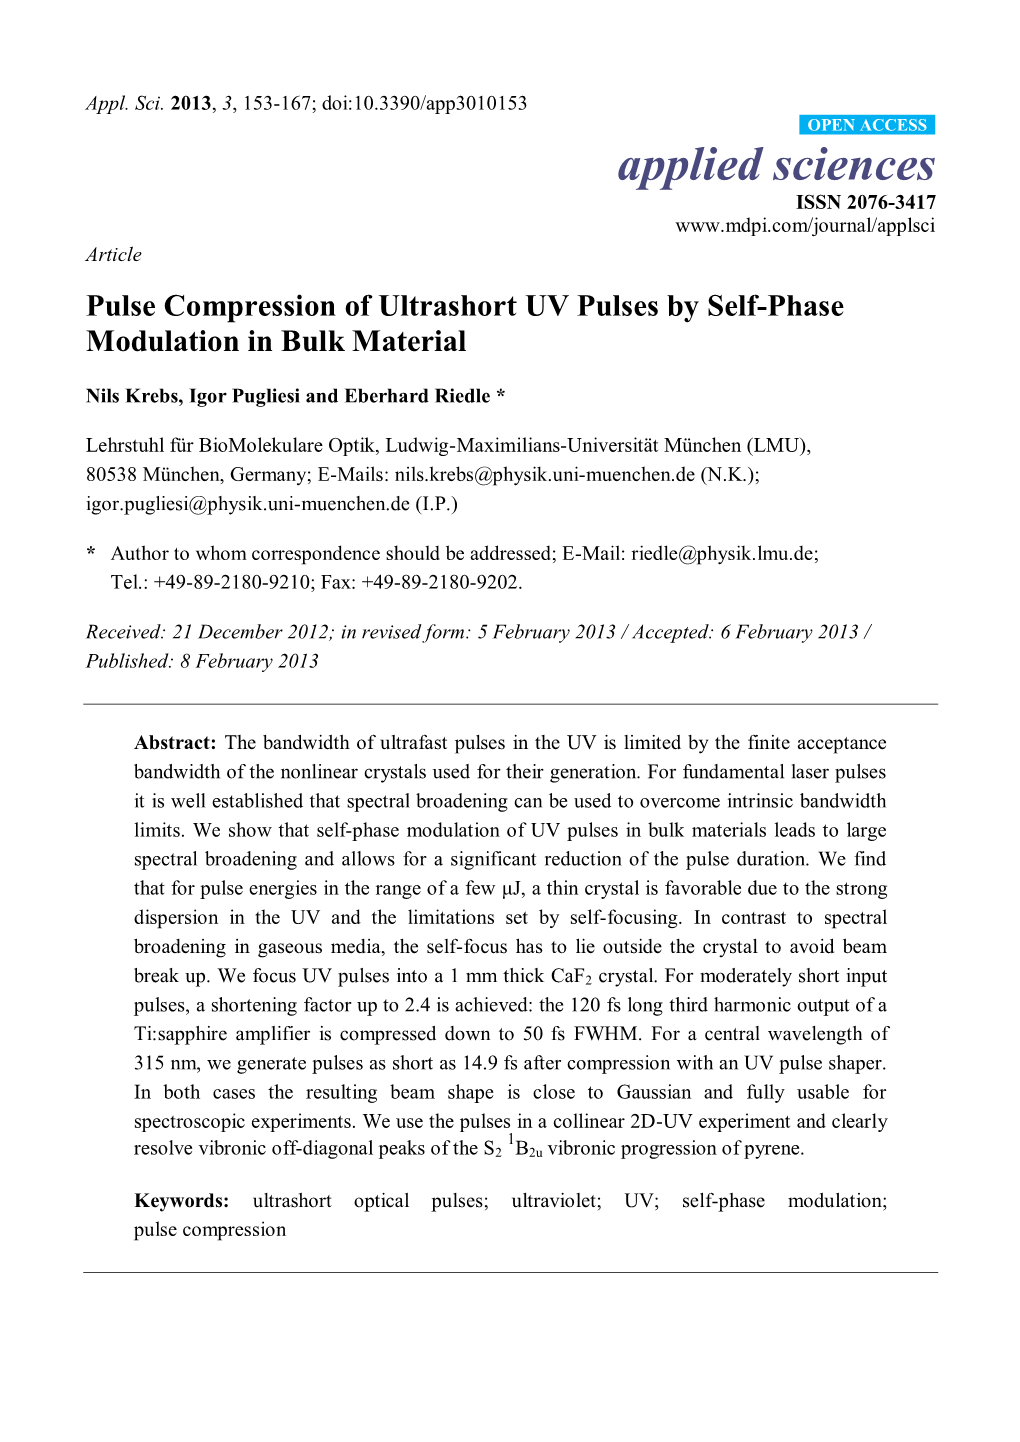 Pulse Compression of Ultrashort UV Pulses by Self-Phase Modulation in Bulk Material